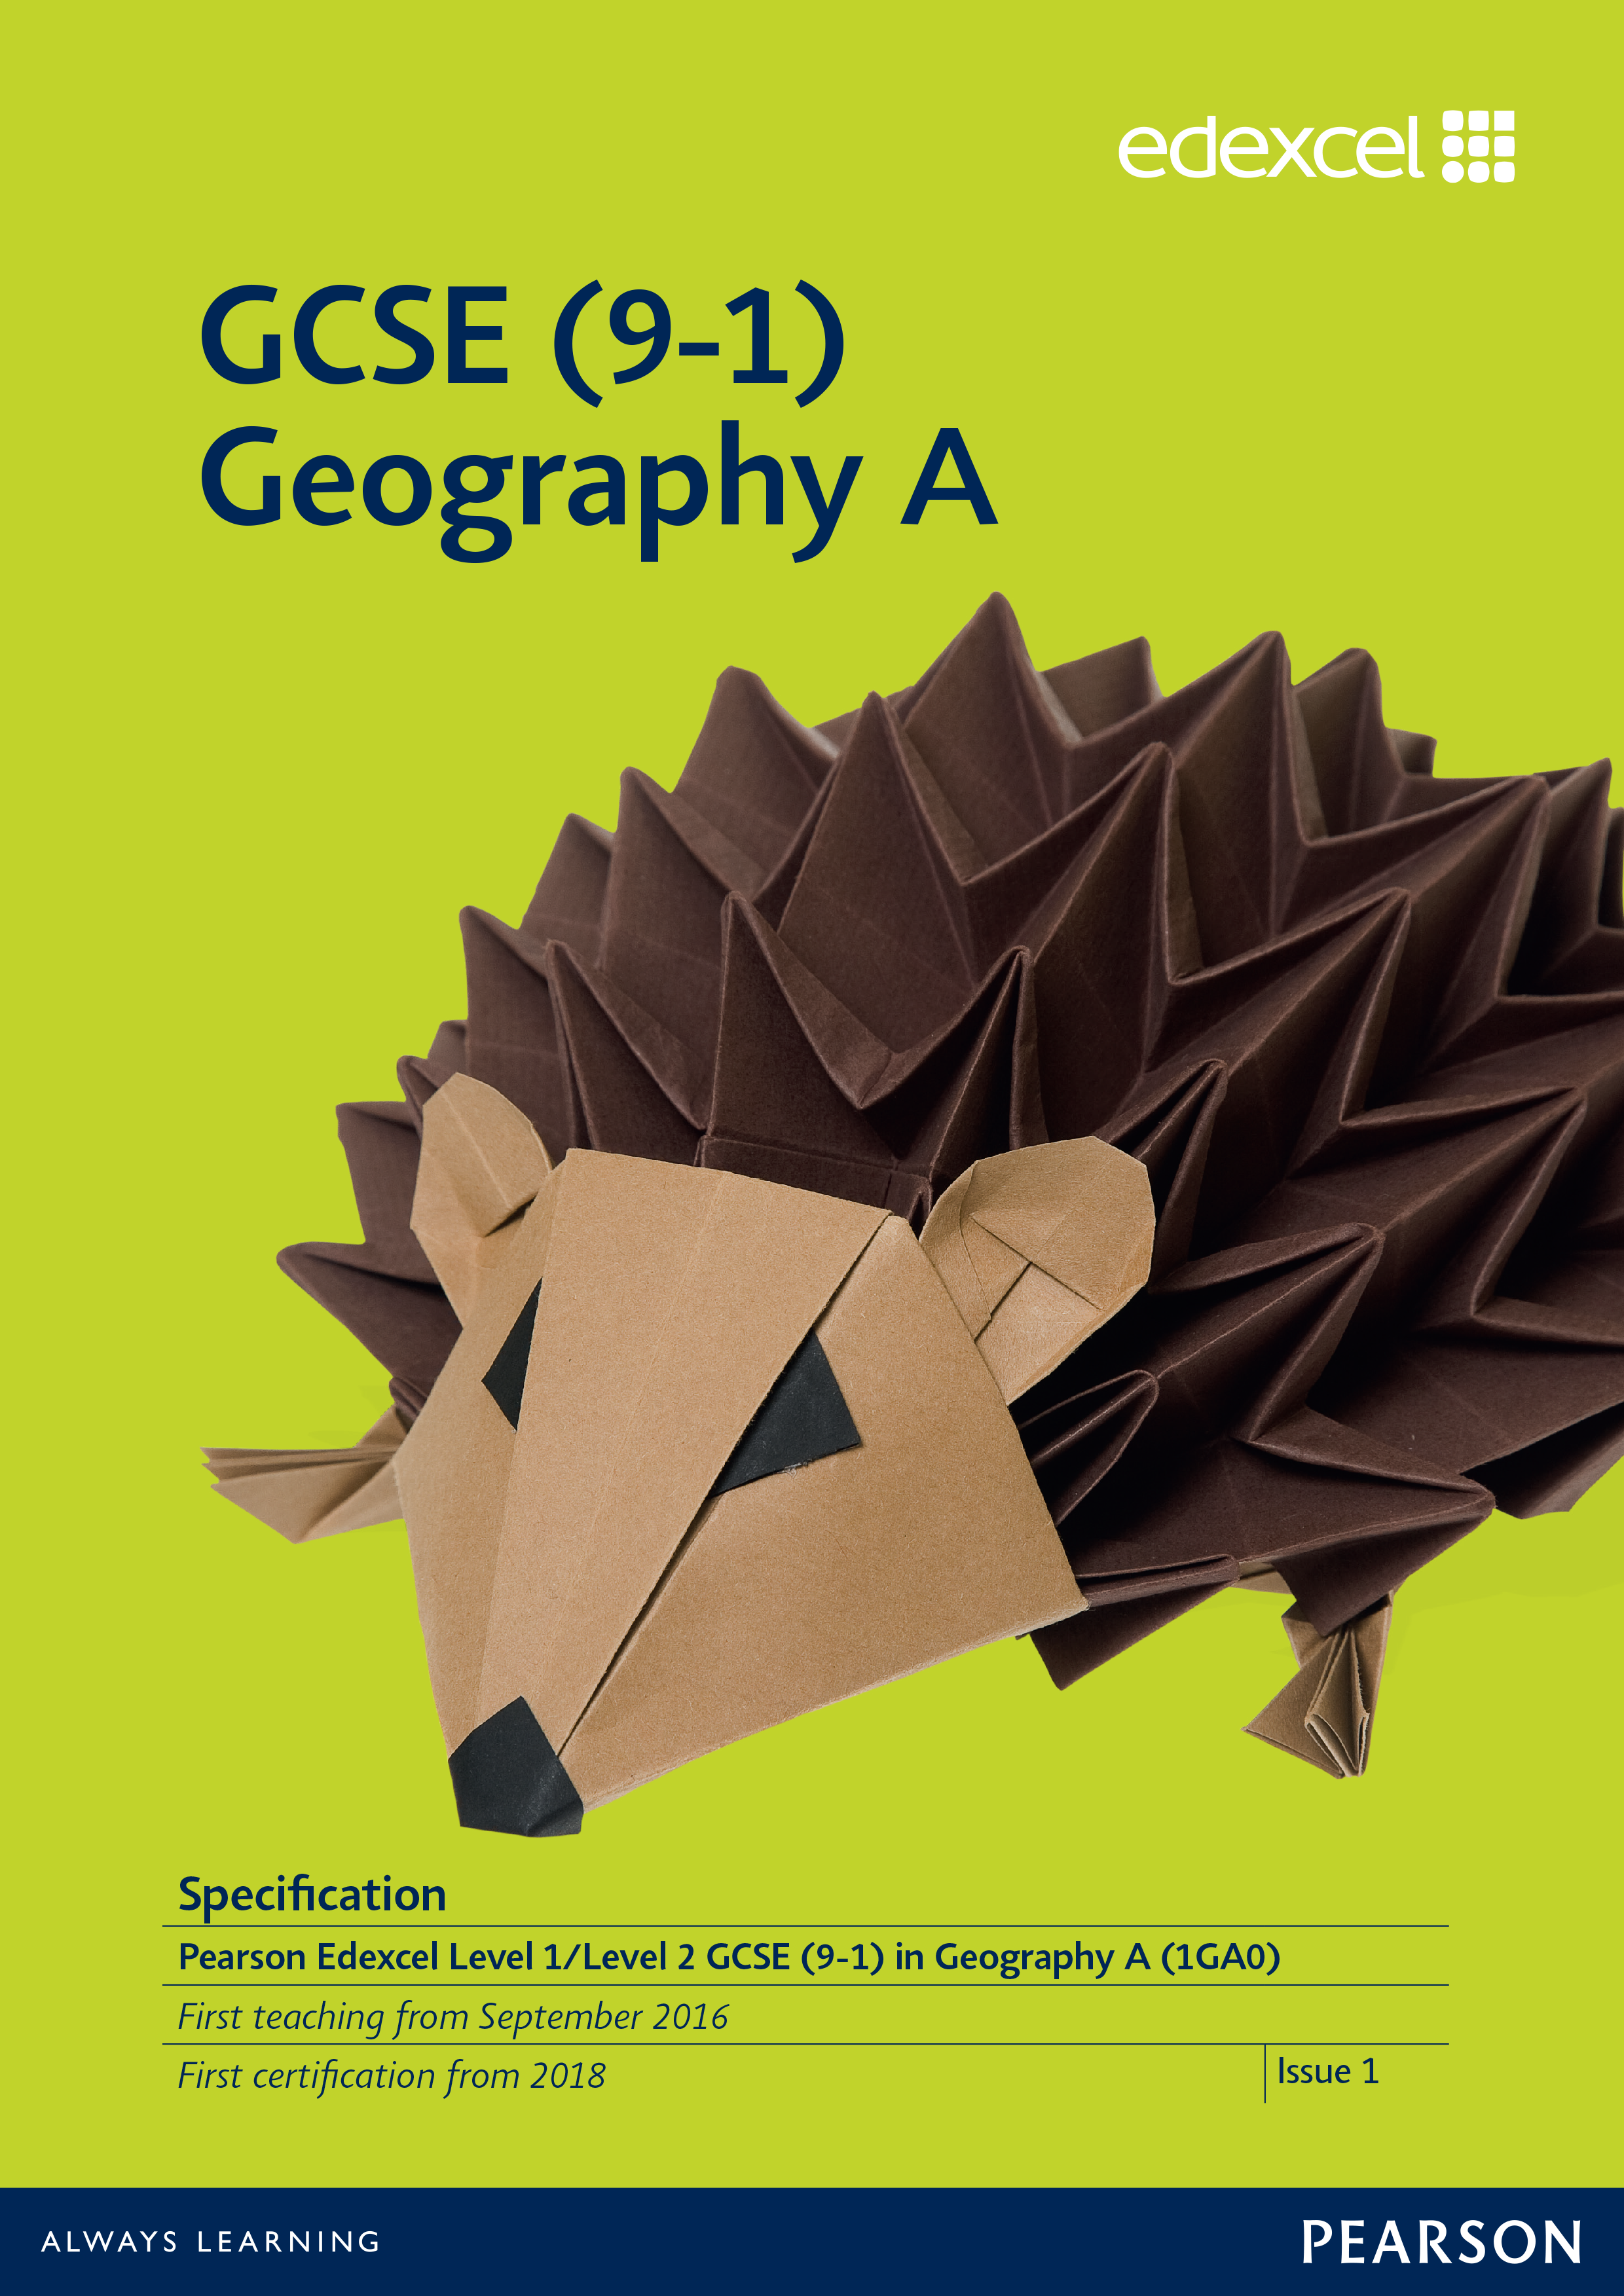 Link to Edexcel GCSE Geography A (2016) specification page 